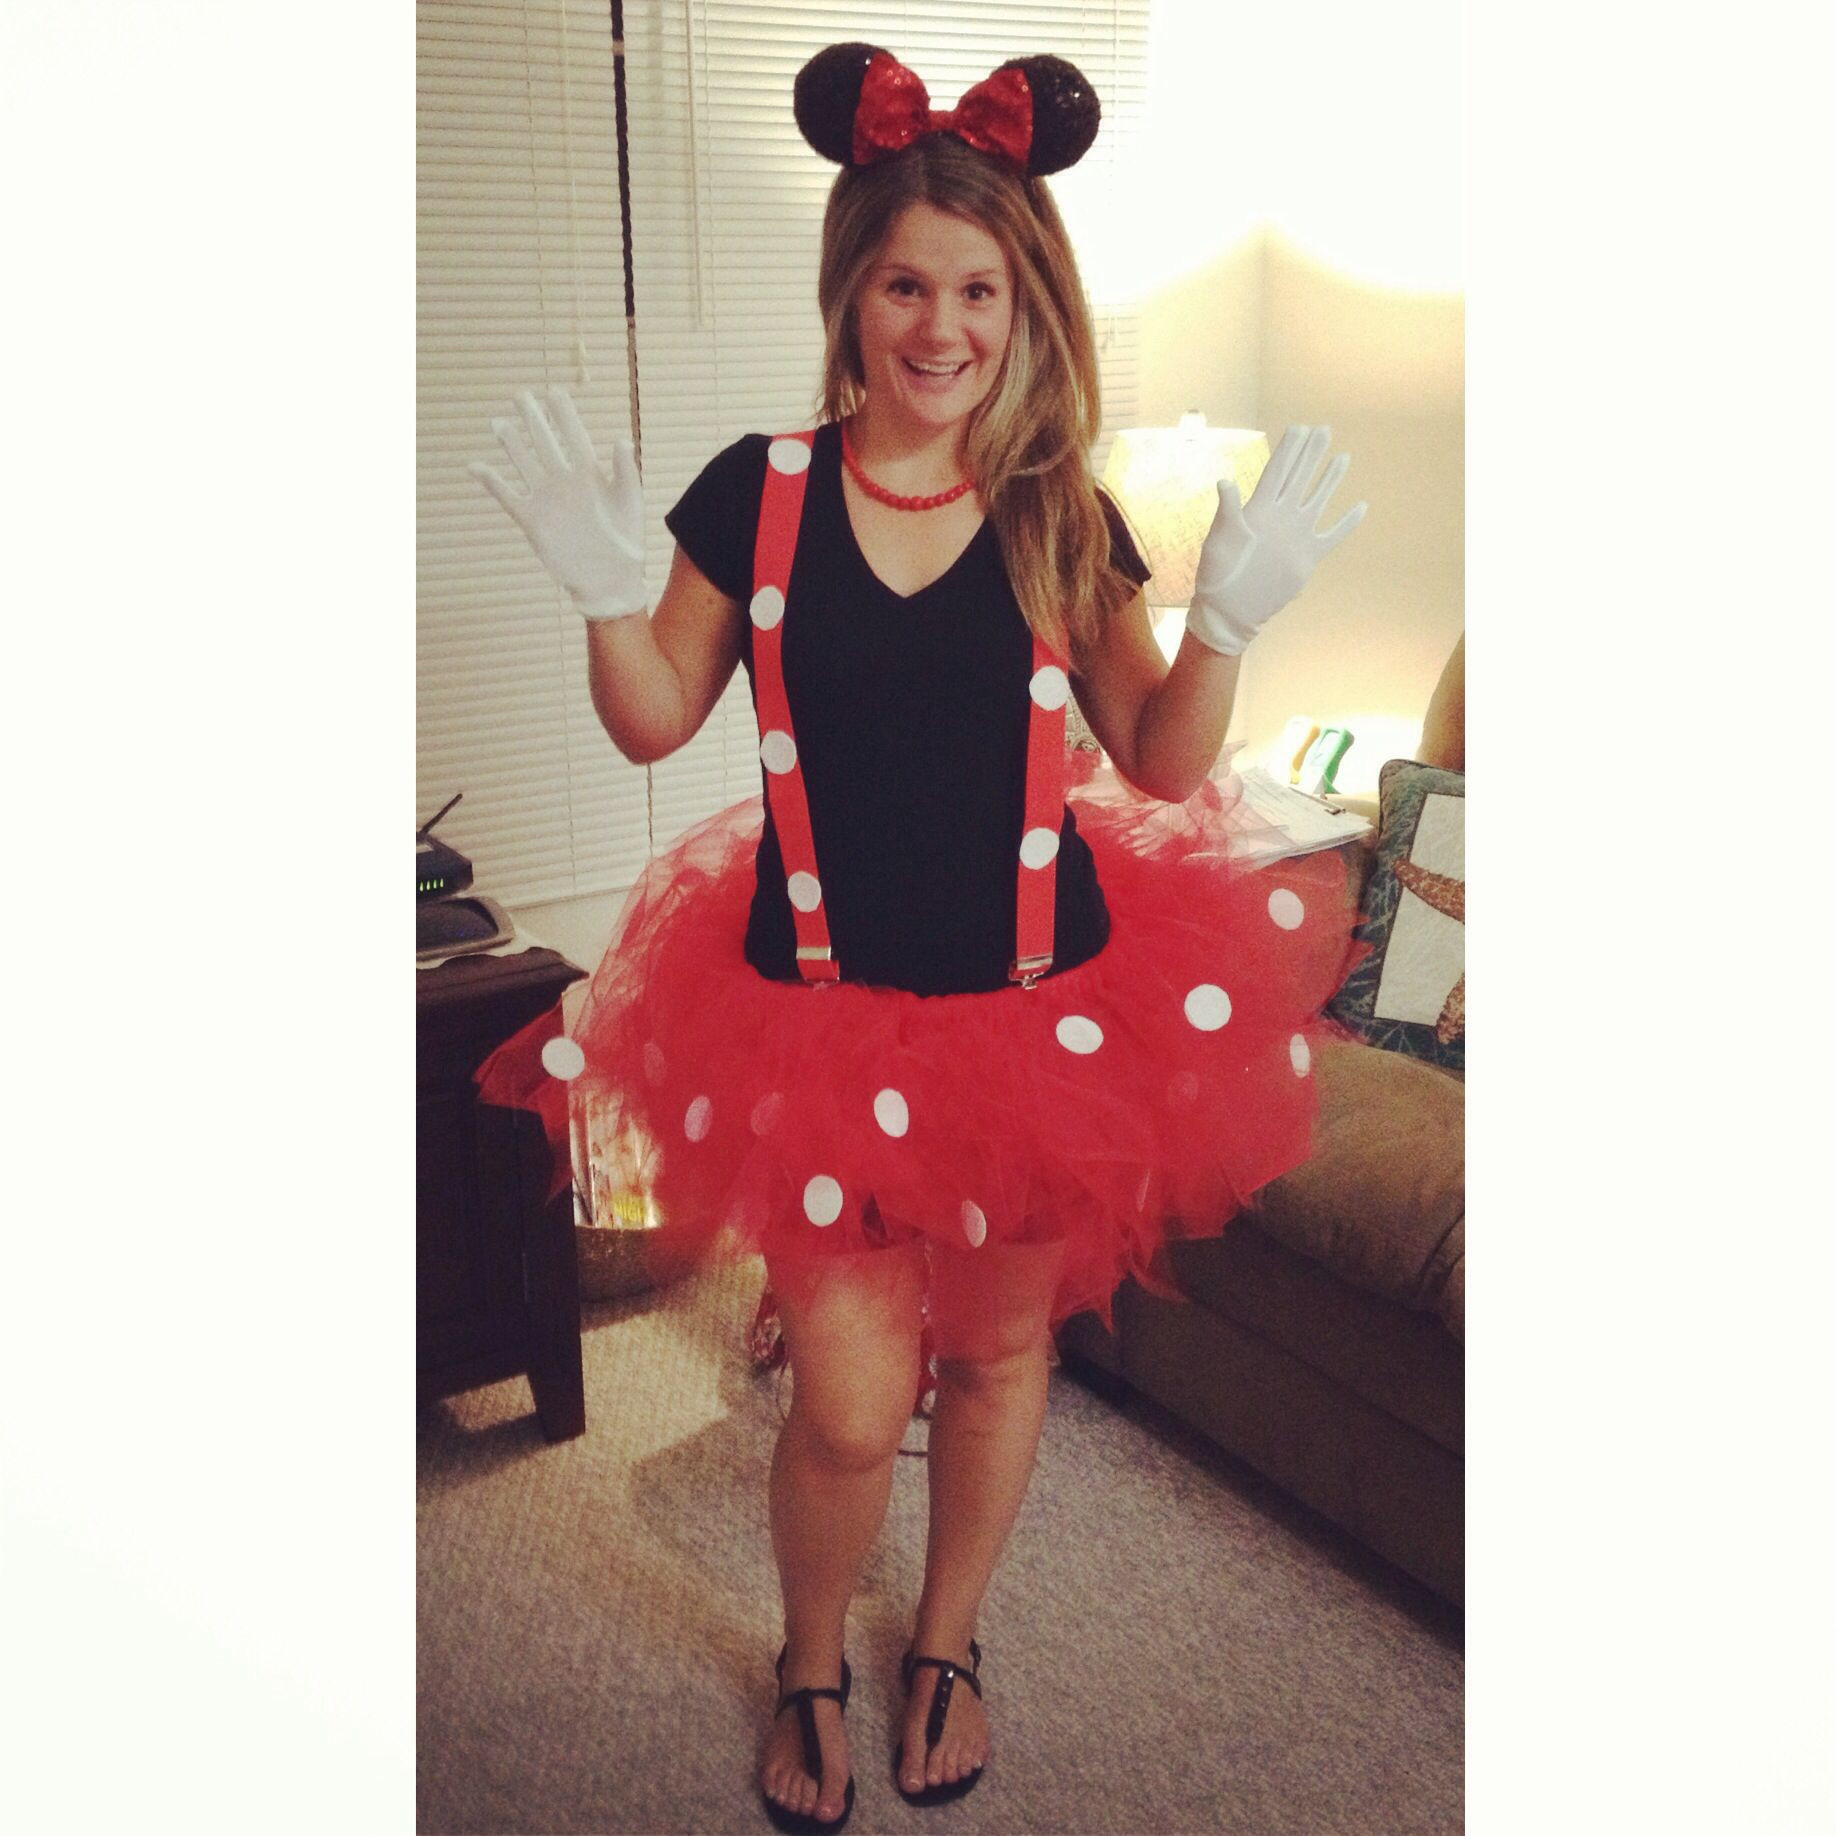 DIY Minnie Mouse Costume For Adults
 DIY Minnie Mouse Costume for a woman DIY